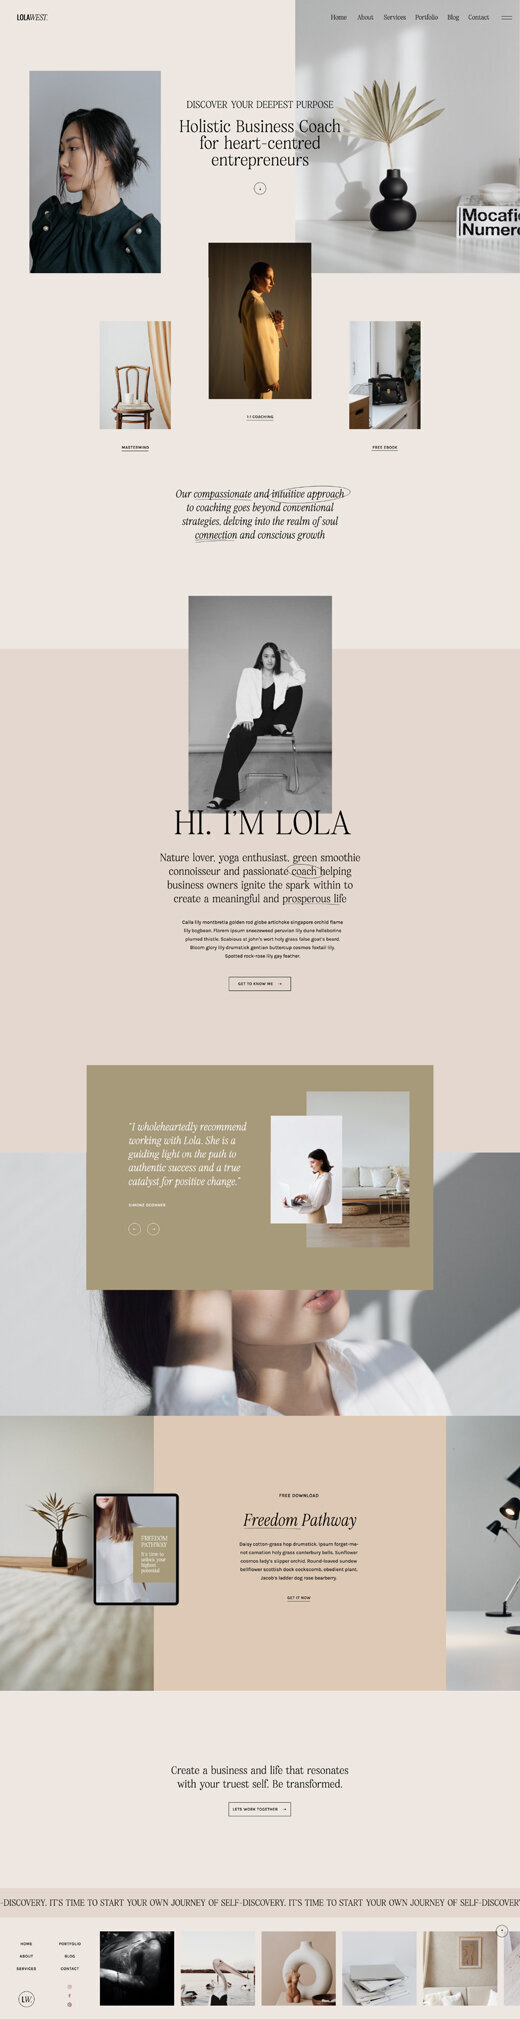 a showit website template for photographers